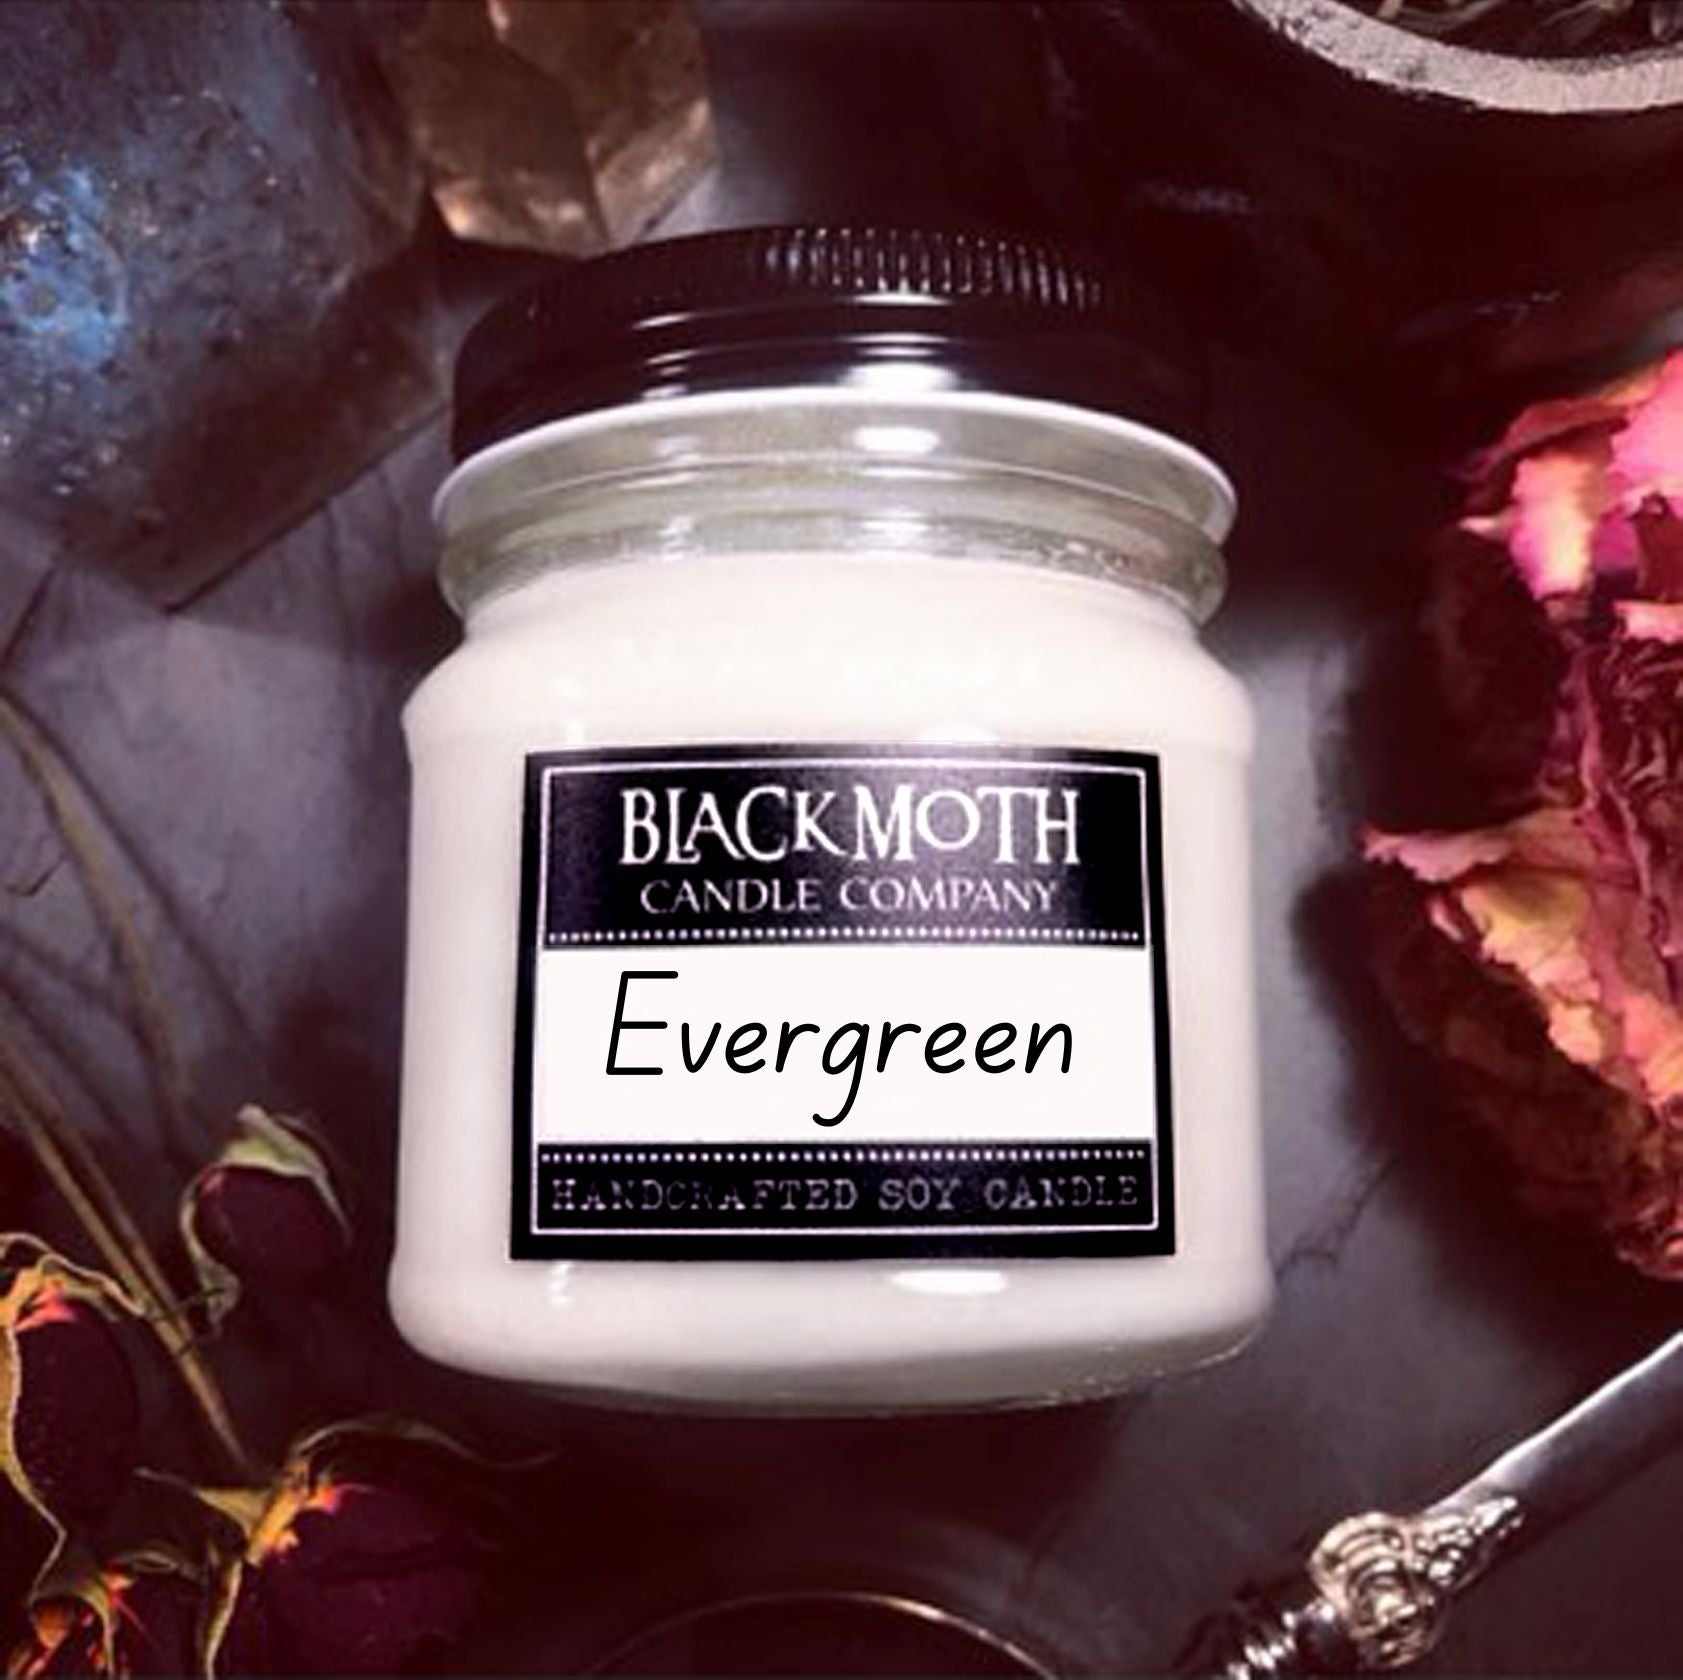 8 oz Evergreen Scented Soy Candle in Mason Jar